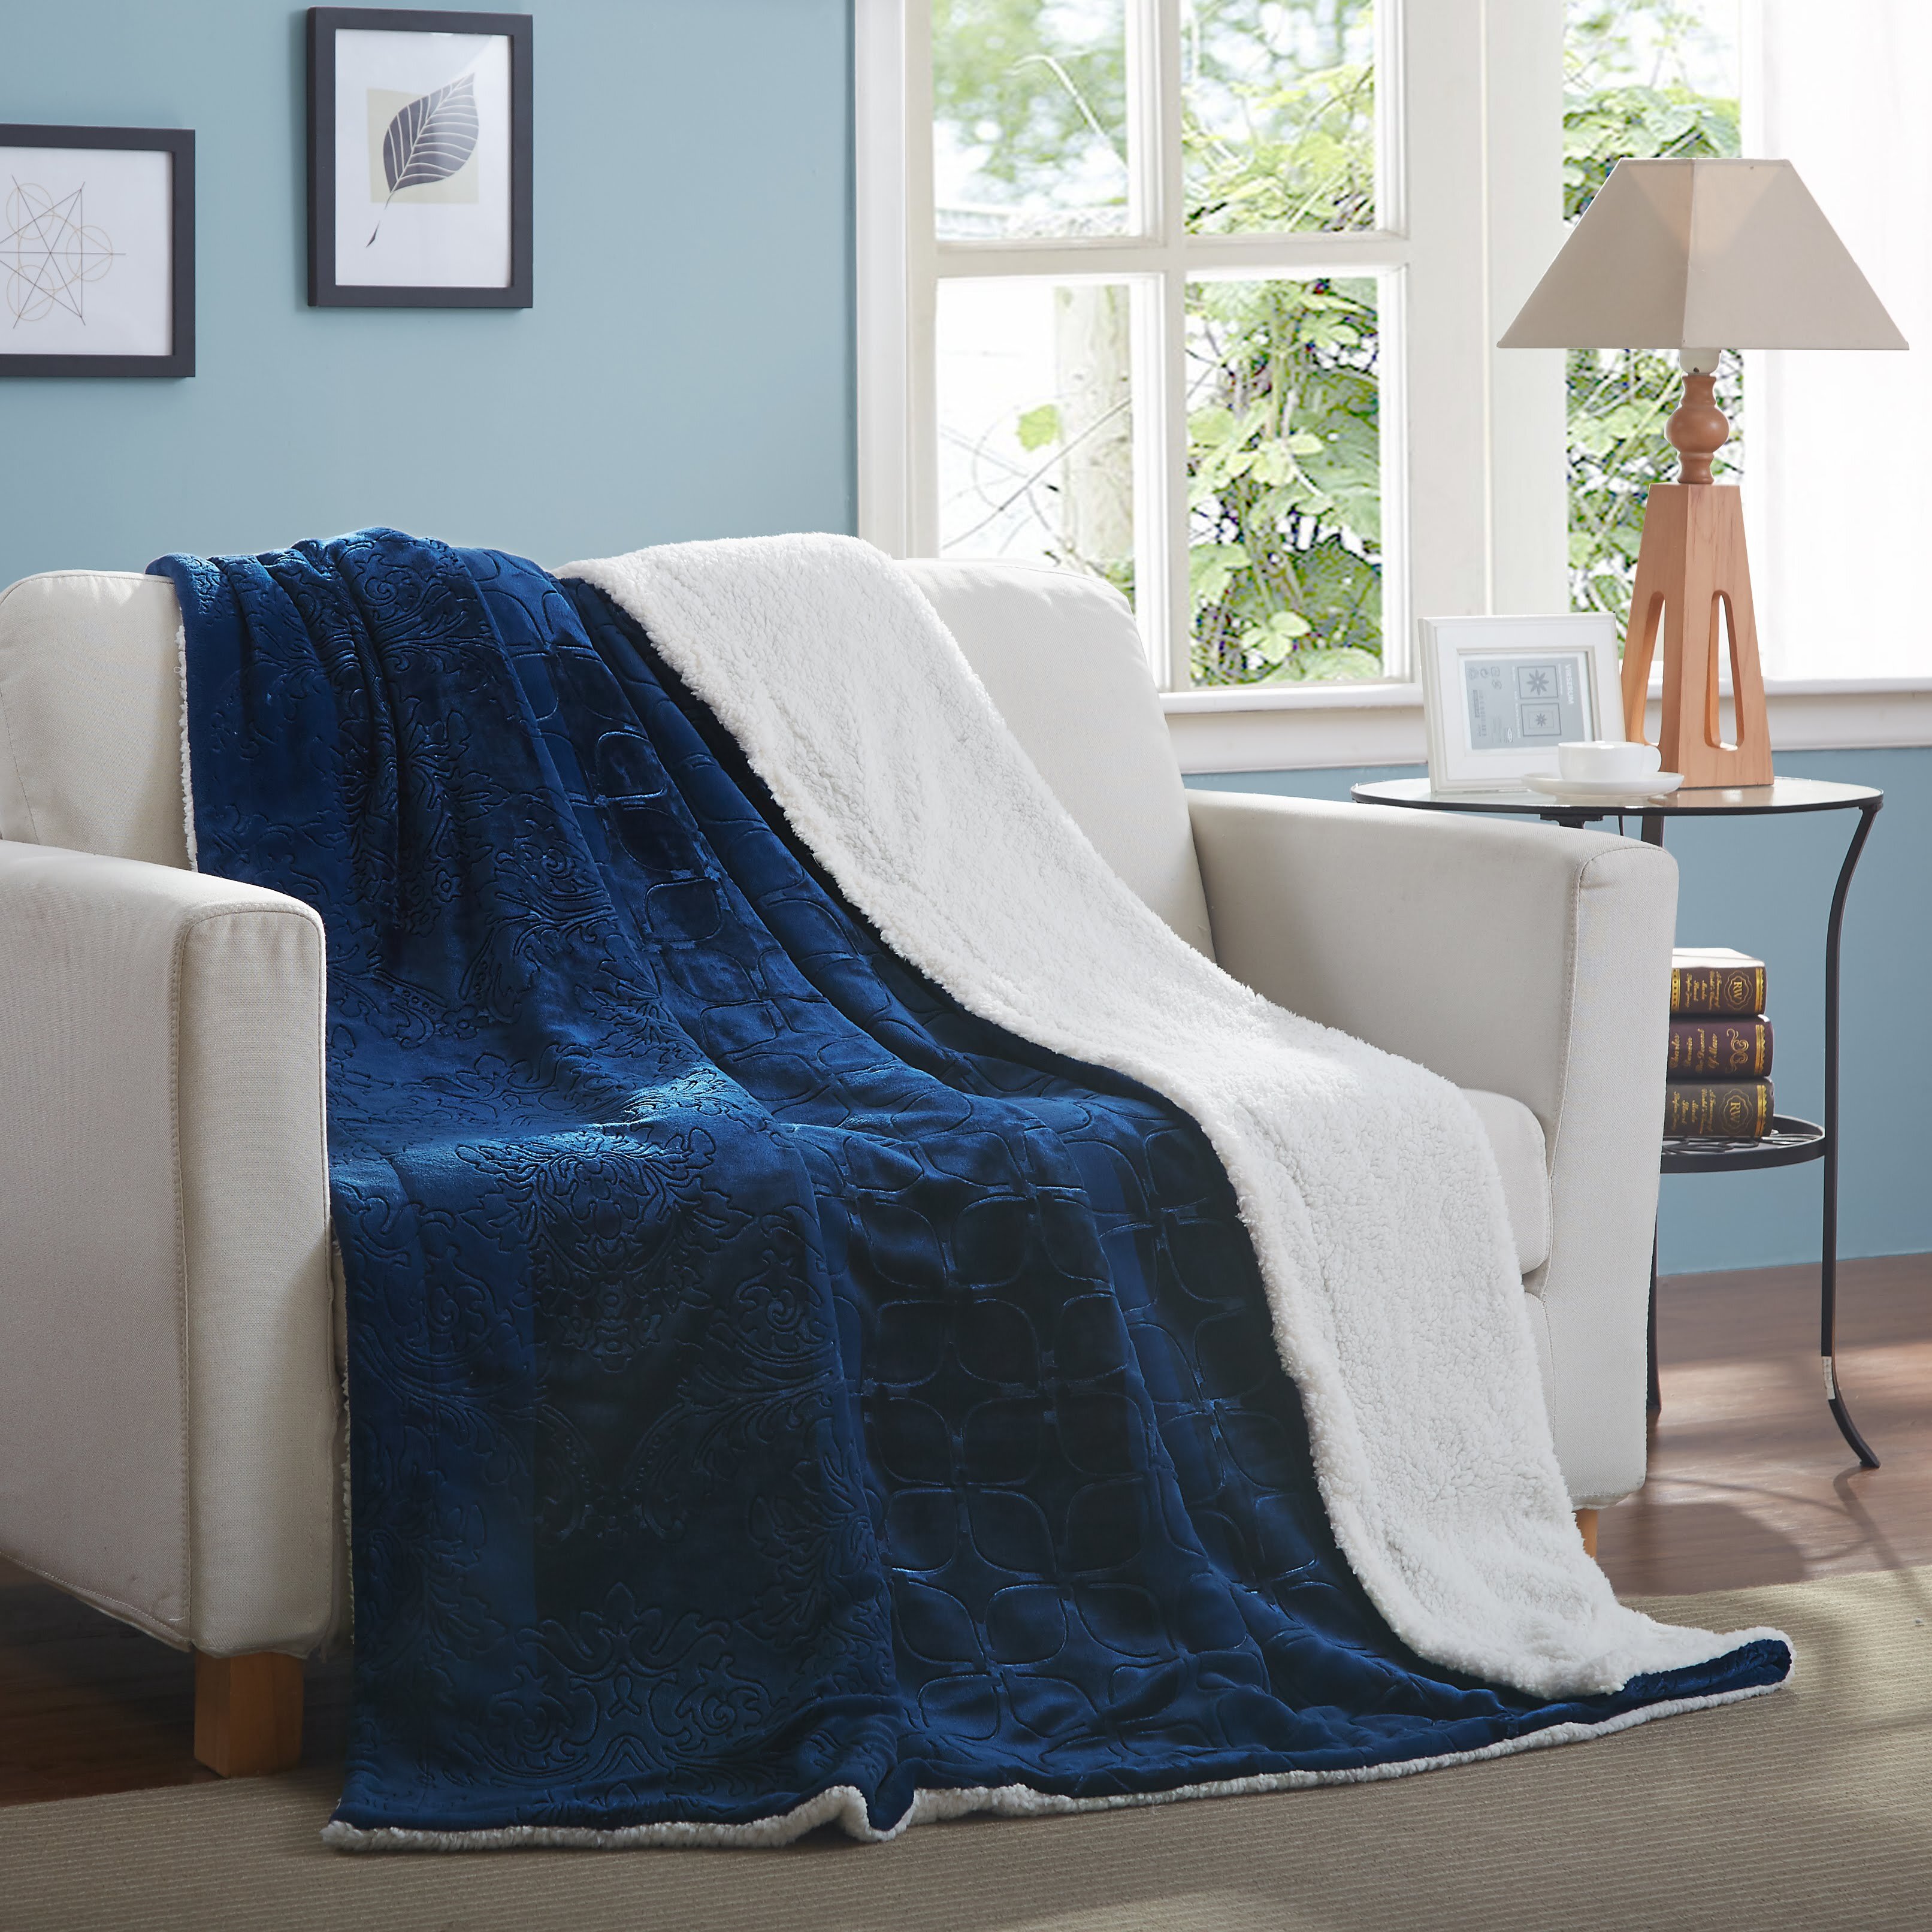 Warm and Lightweight Home Decoration Blanket Slate Blue for Single Size 150 x 200cm Anjee Sherpa Fleece Throw Blanket Double-Sided Super Soft Reversible Bed and Couch Blanket 